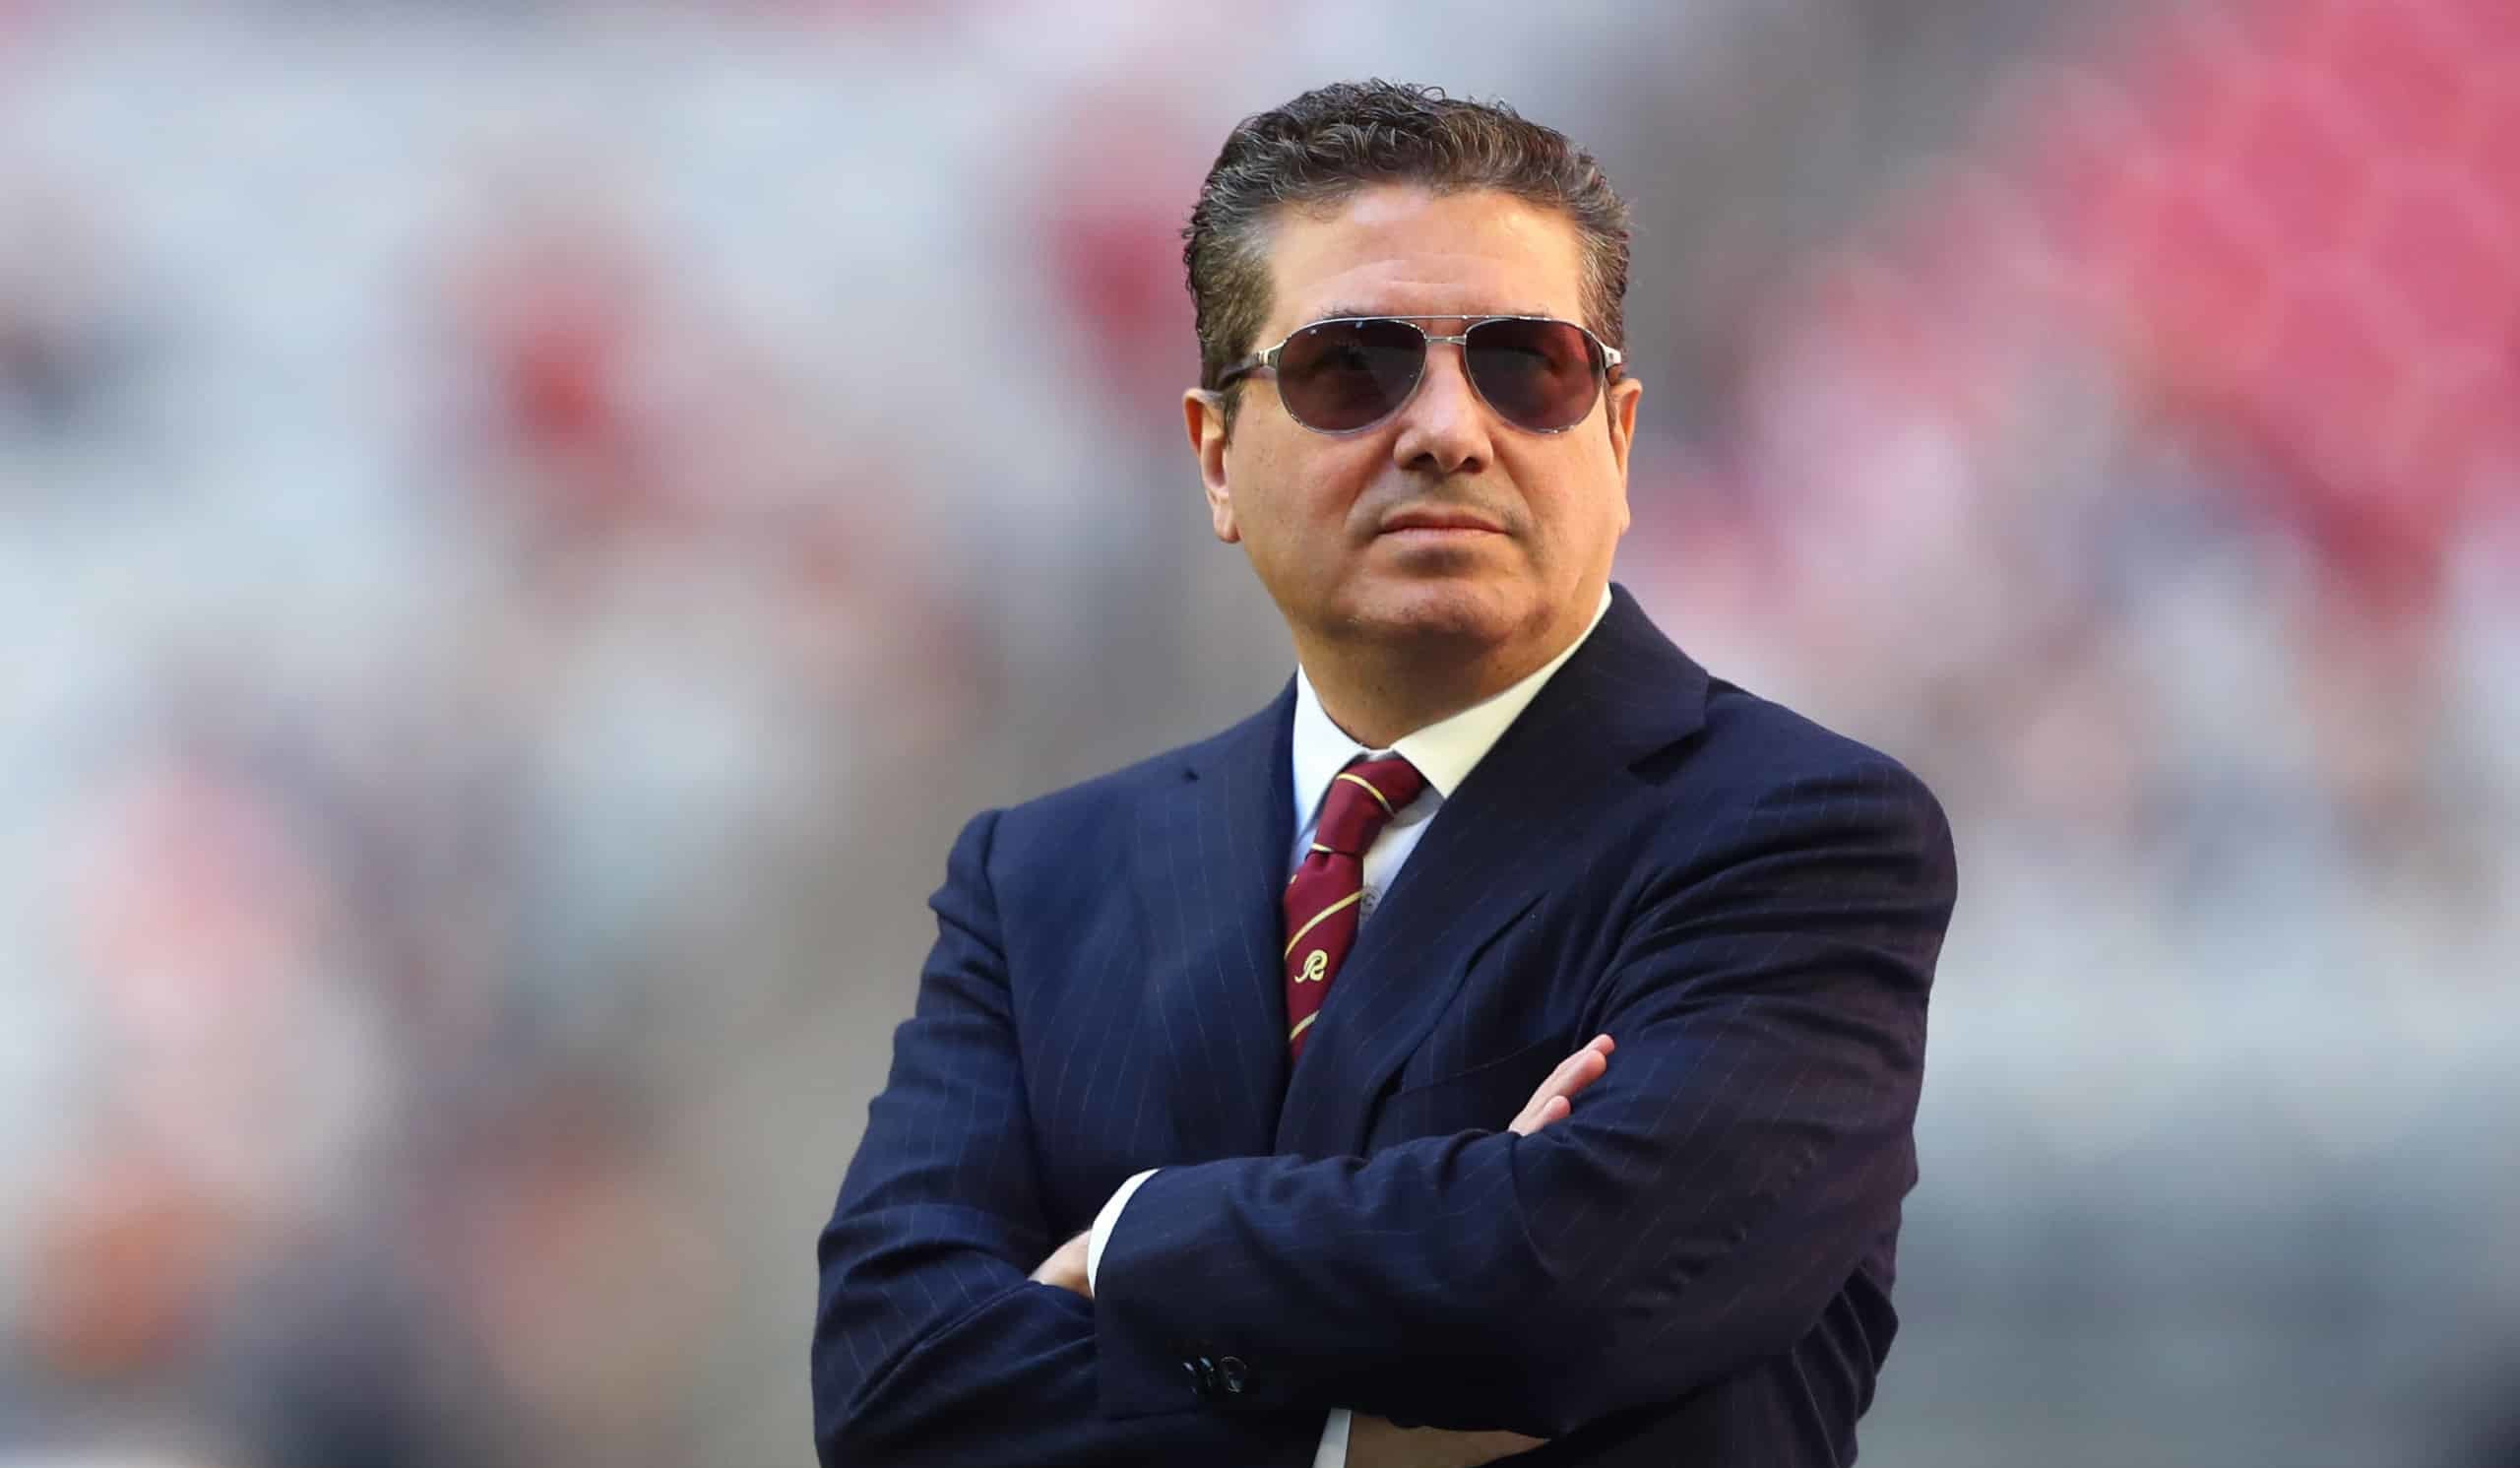 Dan Snyder refuses to testify before Congress again